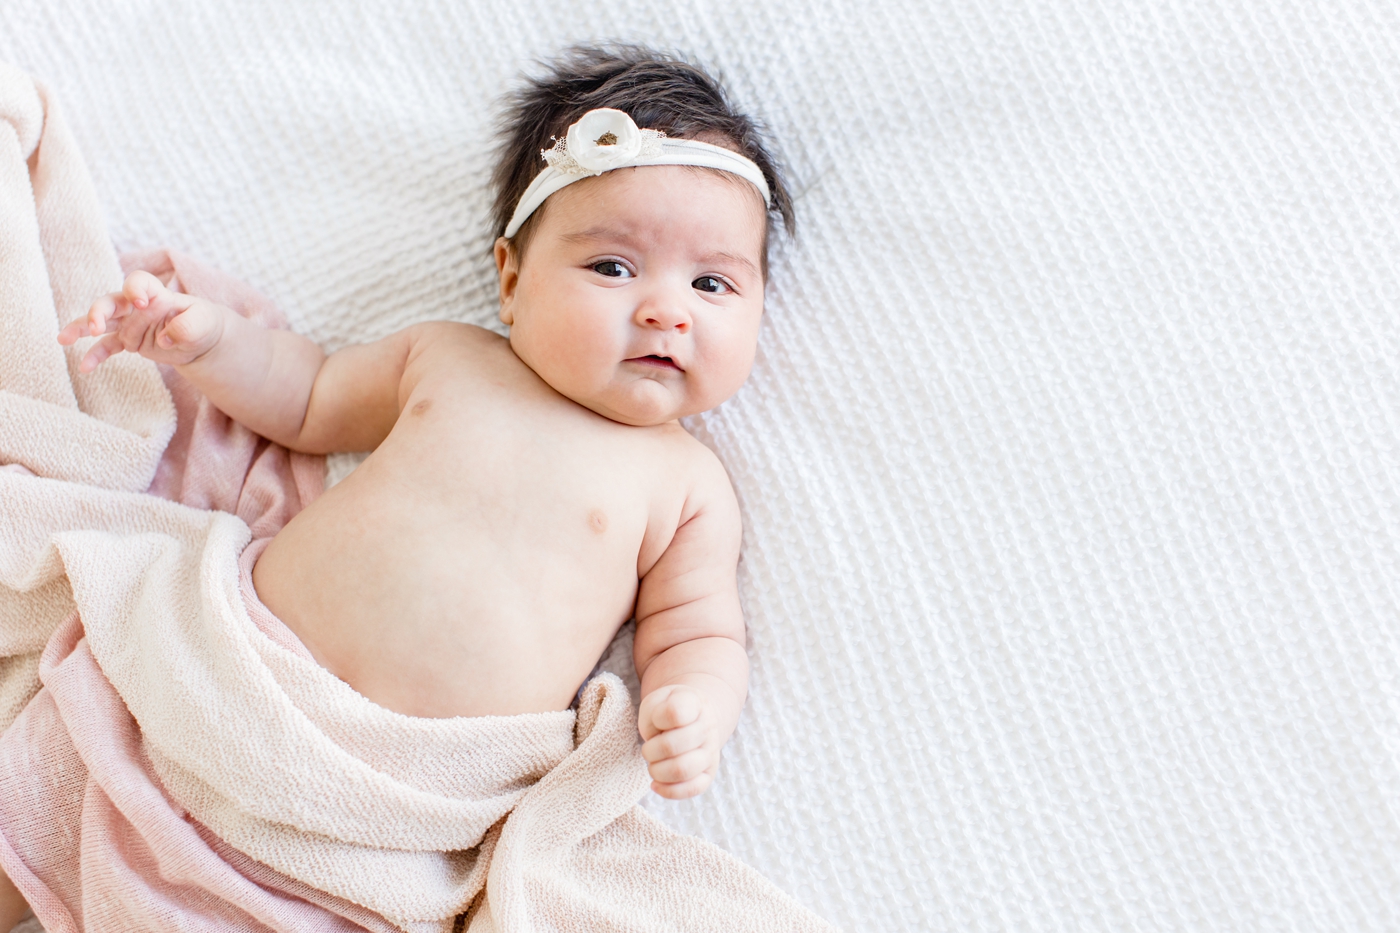 Photo of baby looking at camera with pink knit swaddle by Sana Ahmed Photography.